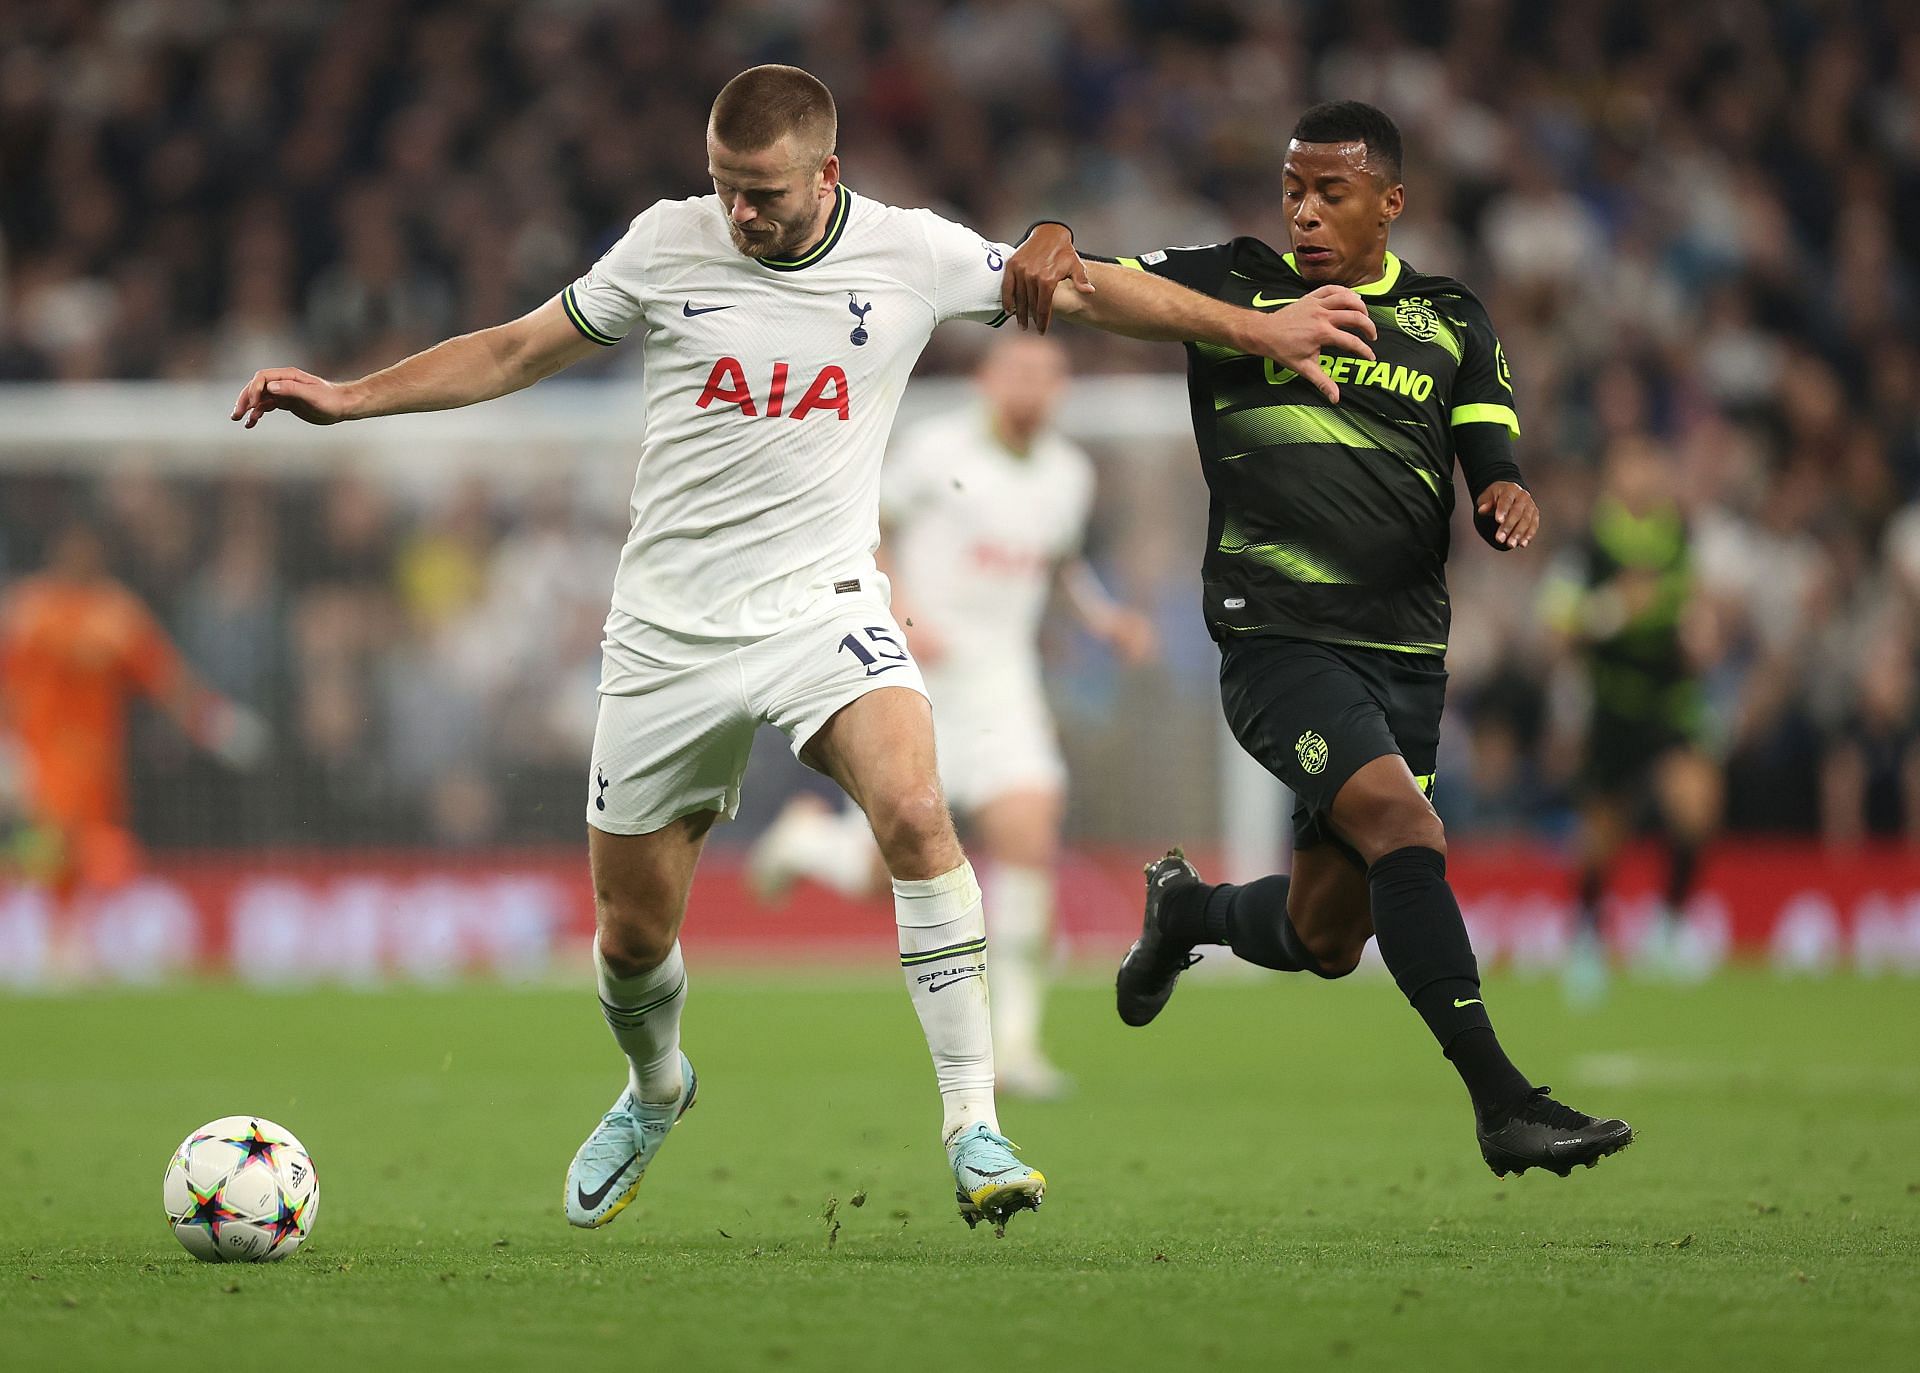 Eric Dier did not have the best of nights for Tottenham Hotspur against Sporting CP.